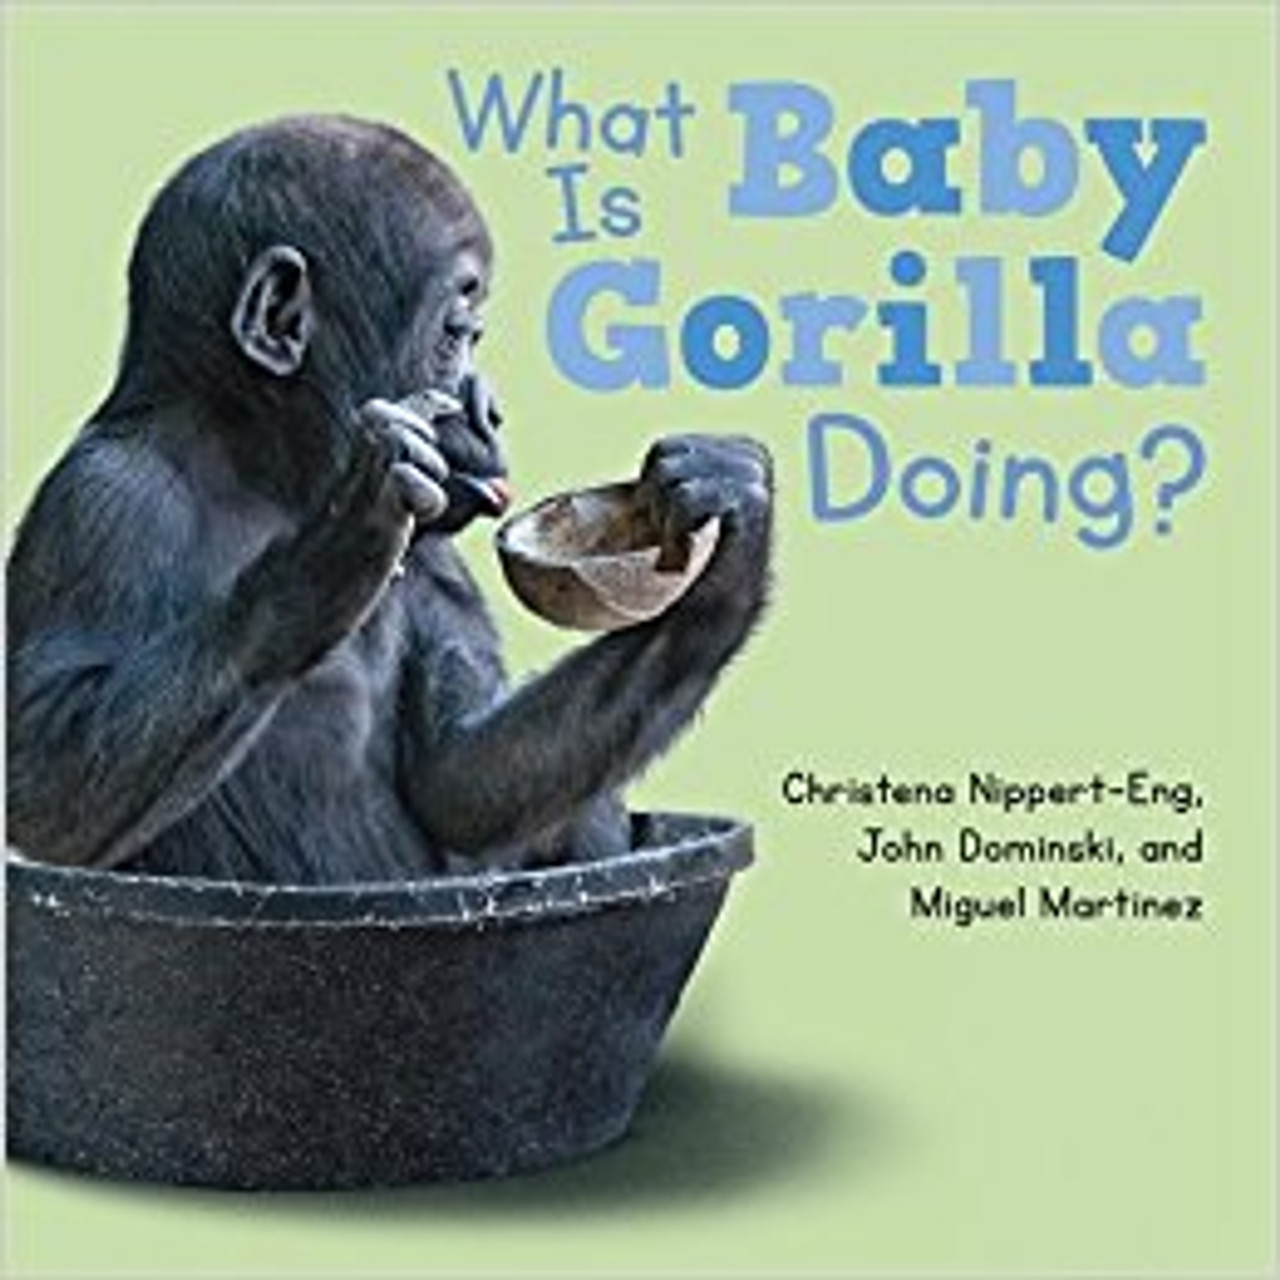 What Is Baby Gorilla Doing? by Christena Nippert-Eng